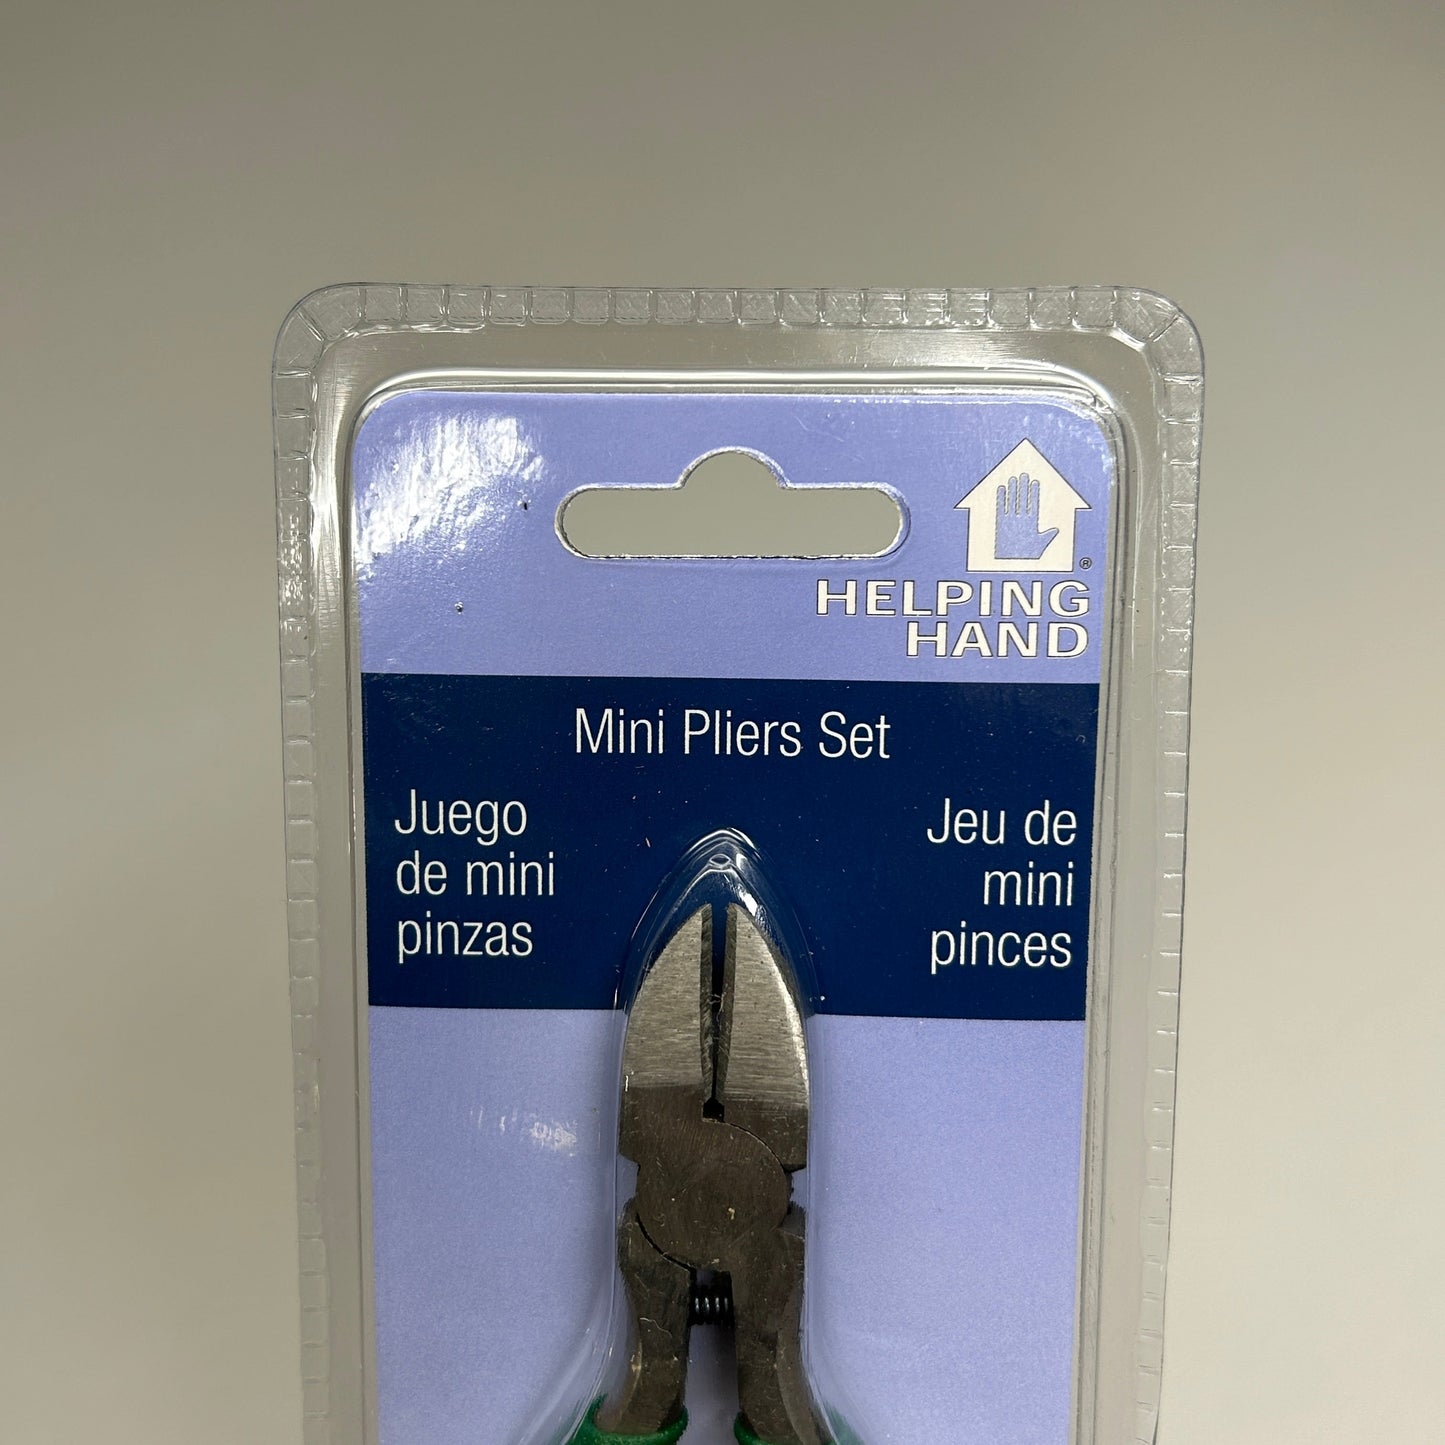 Z@ HELPING HAND 2 Mini Pliers Set Cushioned Grip (New)